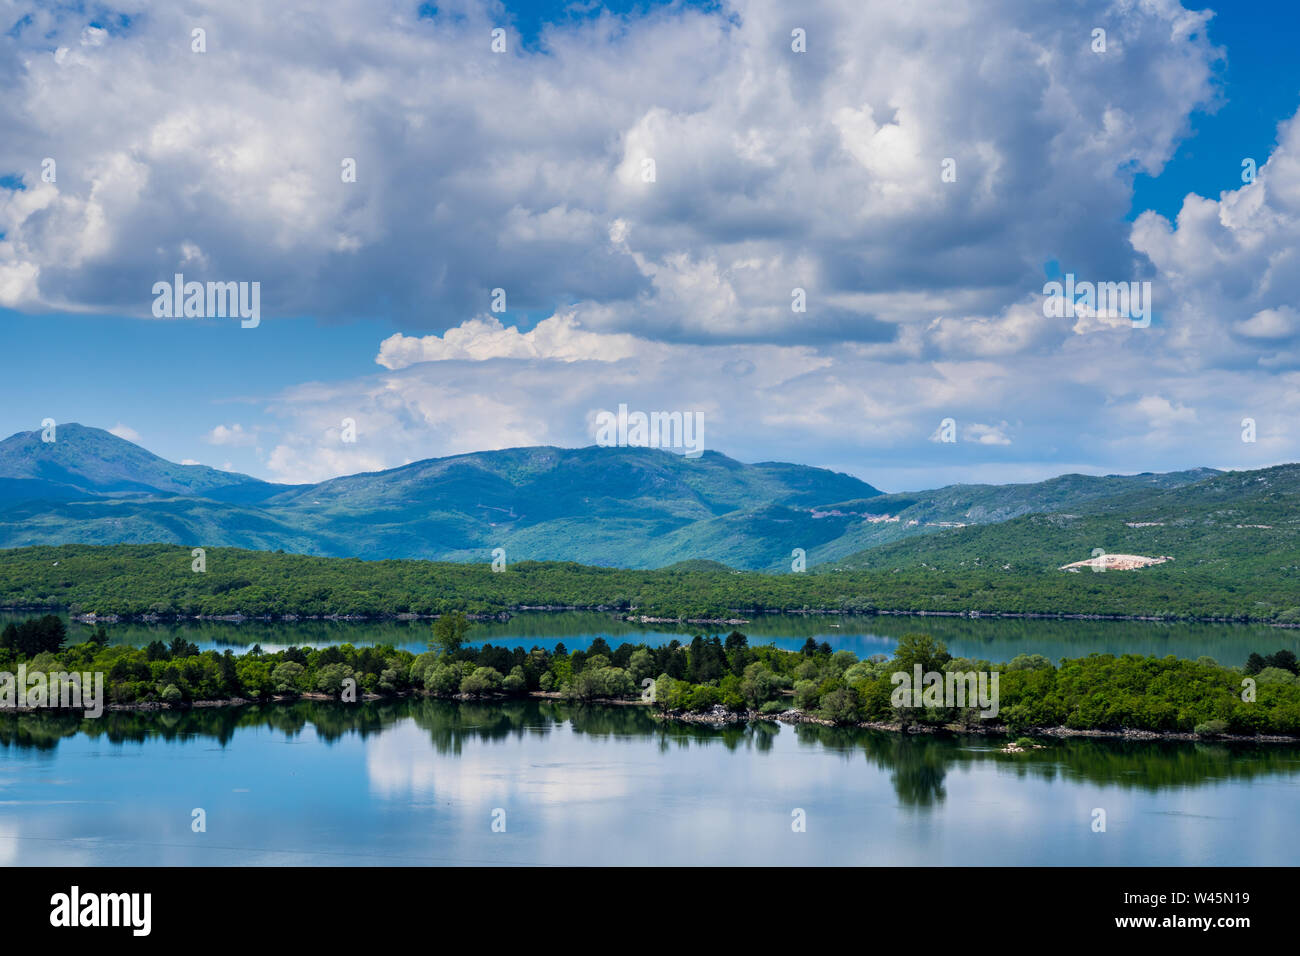 Montenegro, Glassy water of lake krupac, an artificial lake near niksic city inside green forest nature landscape surrounded by mountains under blue s Stock Photo